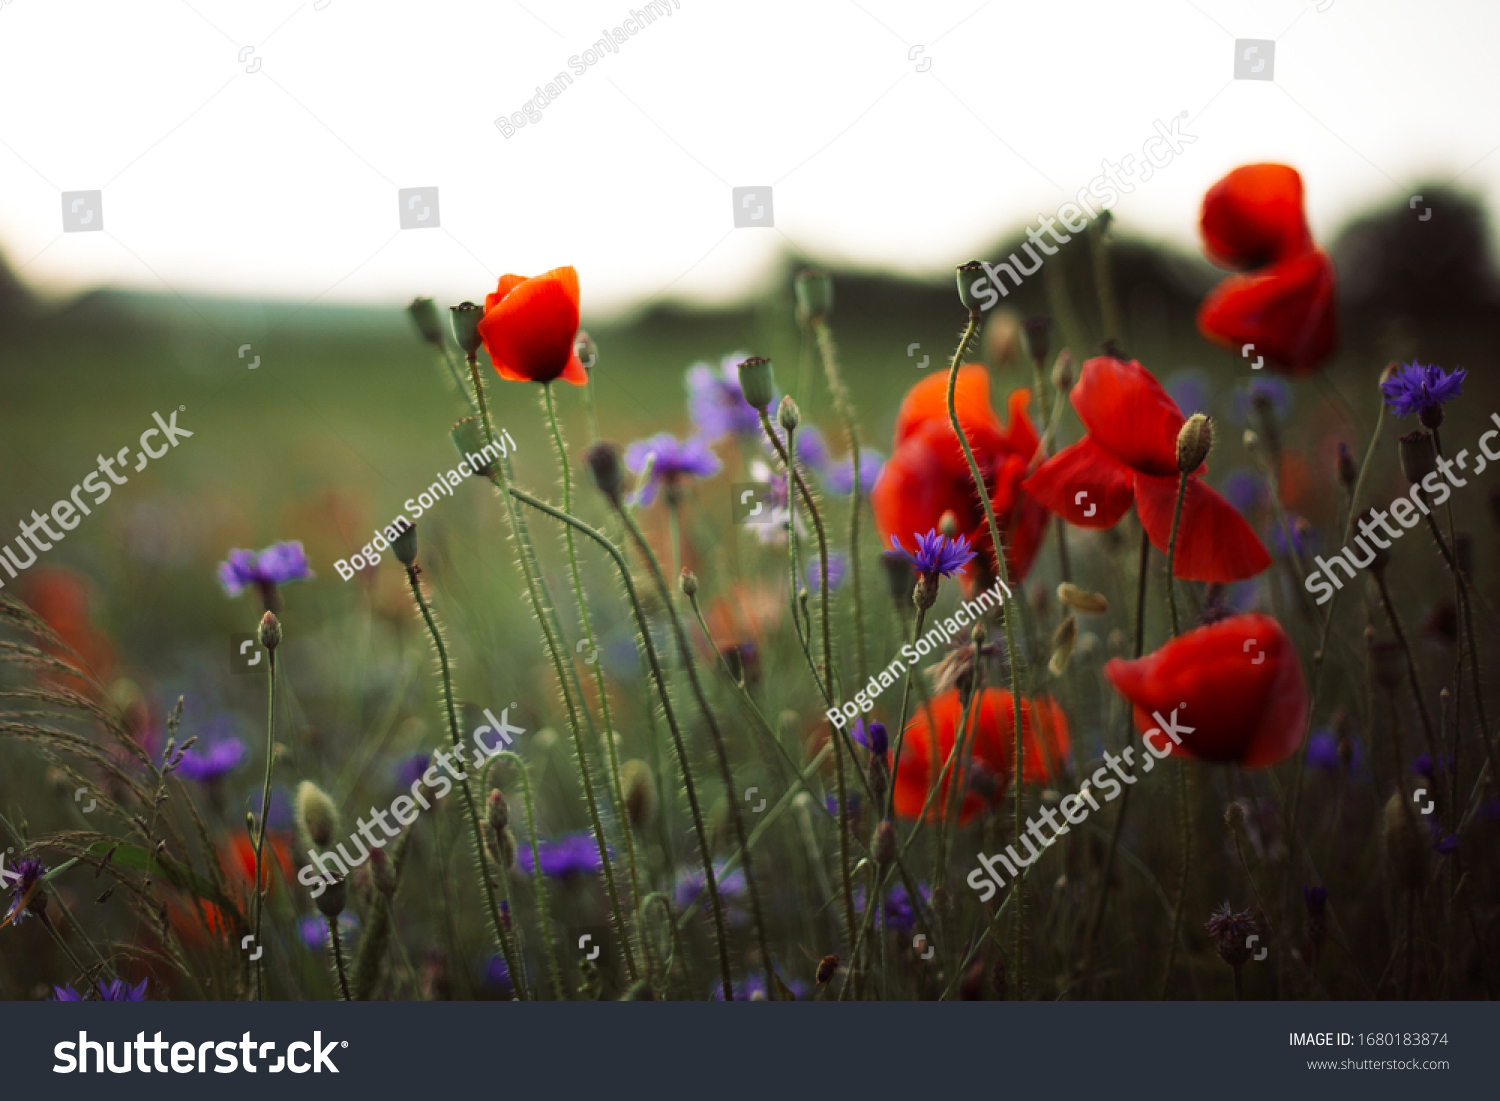 Poppy and cornflowers in sunset light in summer meadow, selective focus. Atmospheric beautiful moment. Wildflowers in warm light, flowers close up in countryside. Rural simple life #1680183874